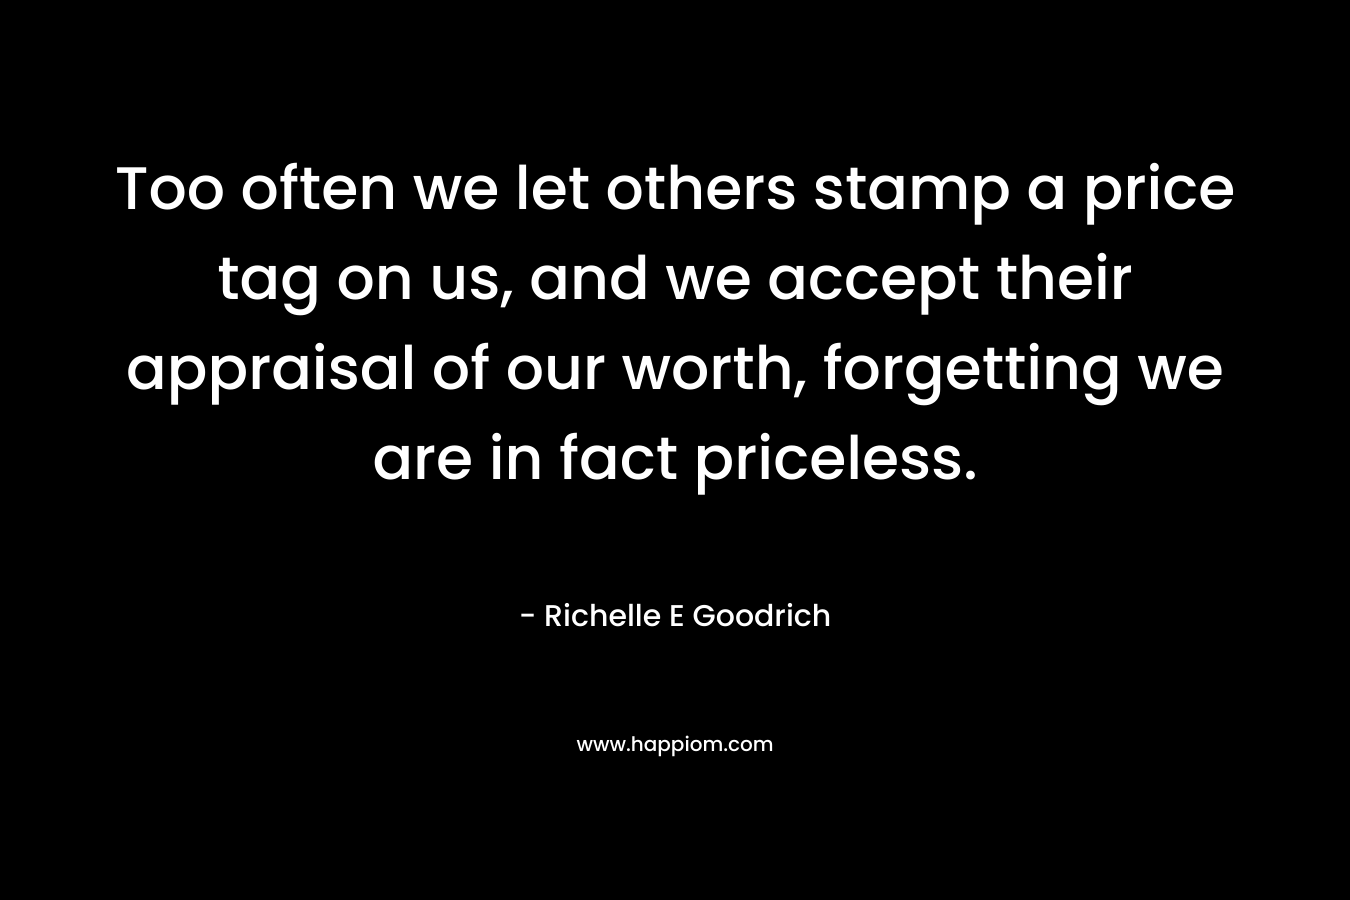 Too often we let others stamp a price tag on us, and we accept their appraisal of our worth, forgetting we are in fact priceless.